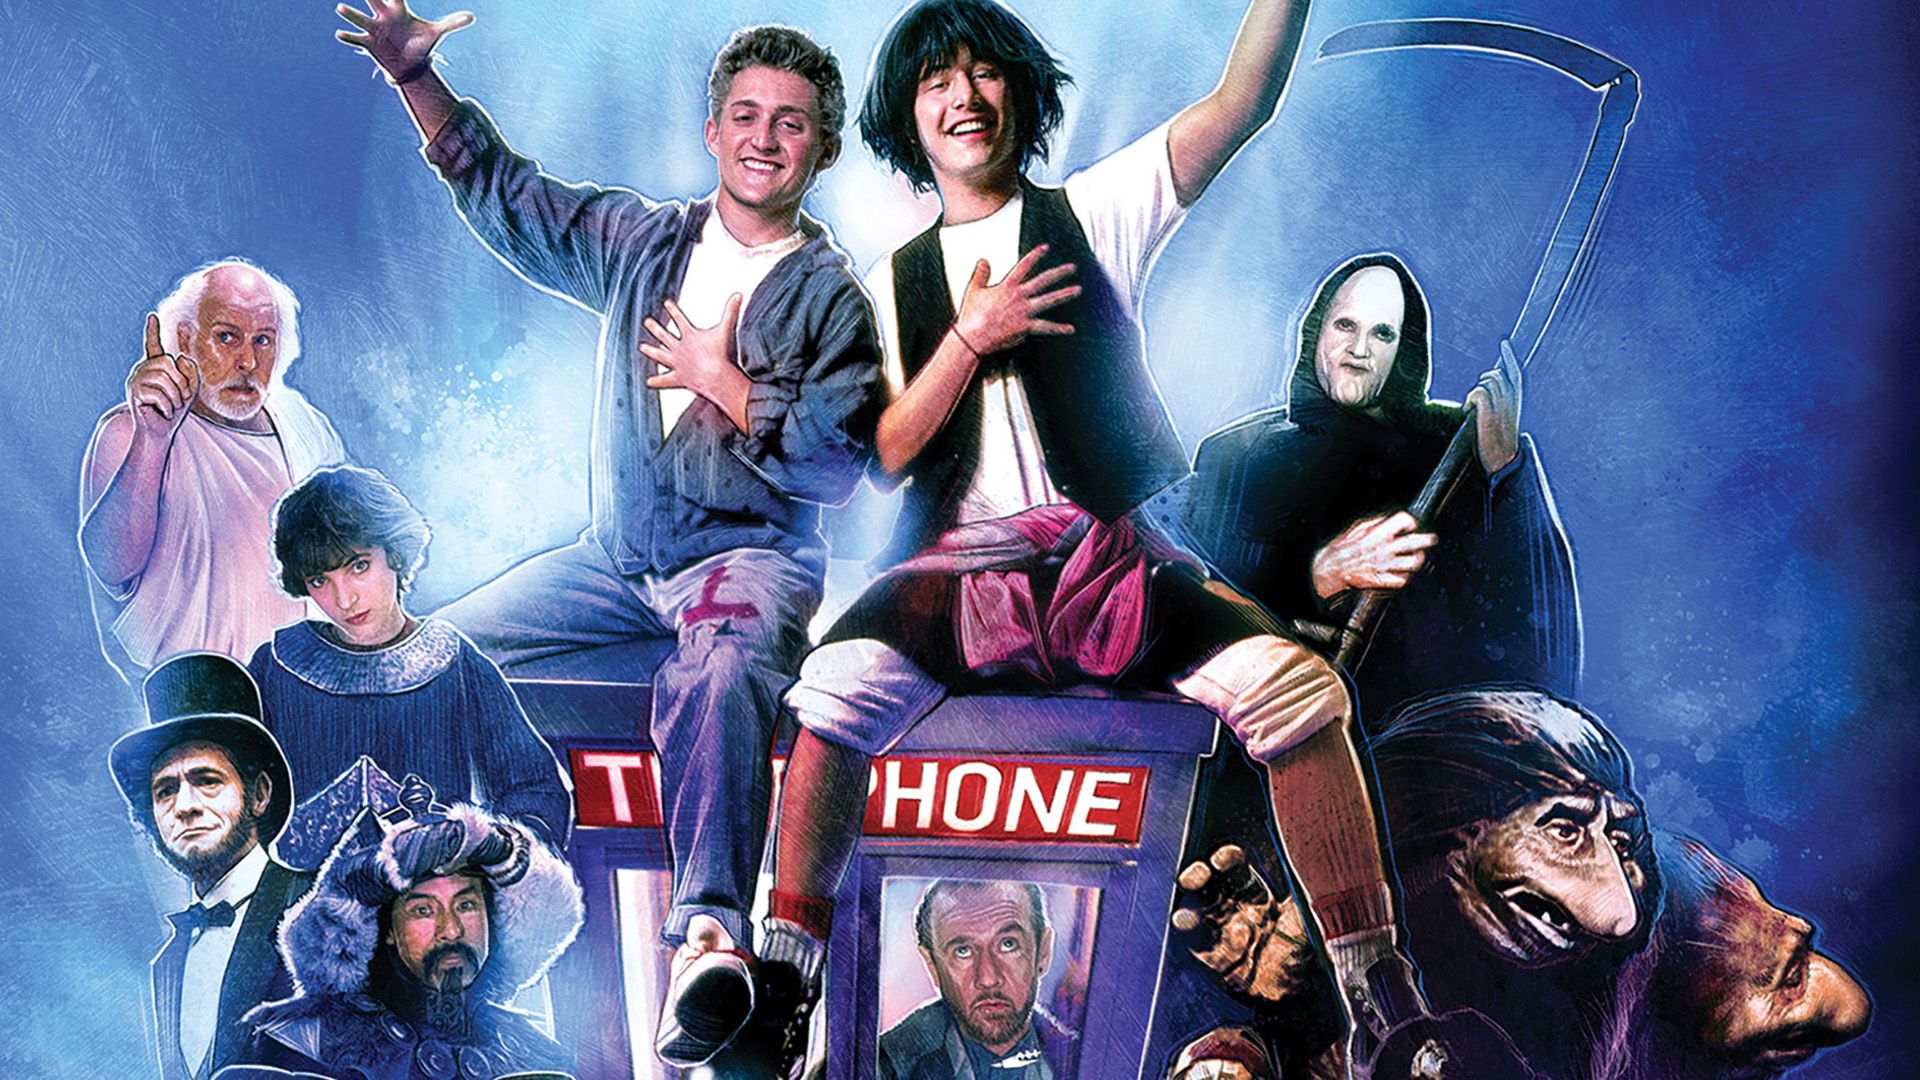 Bill & Ted's Most Excellent background